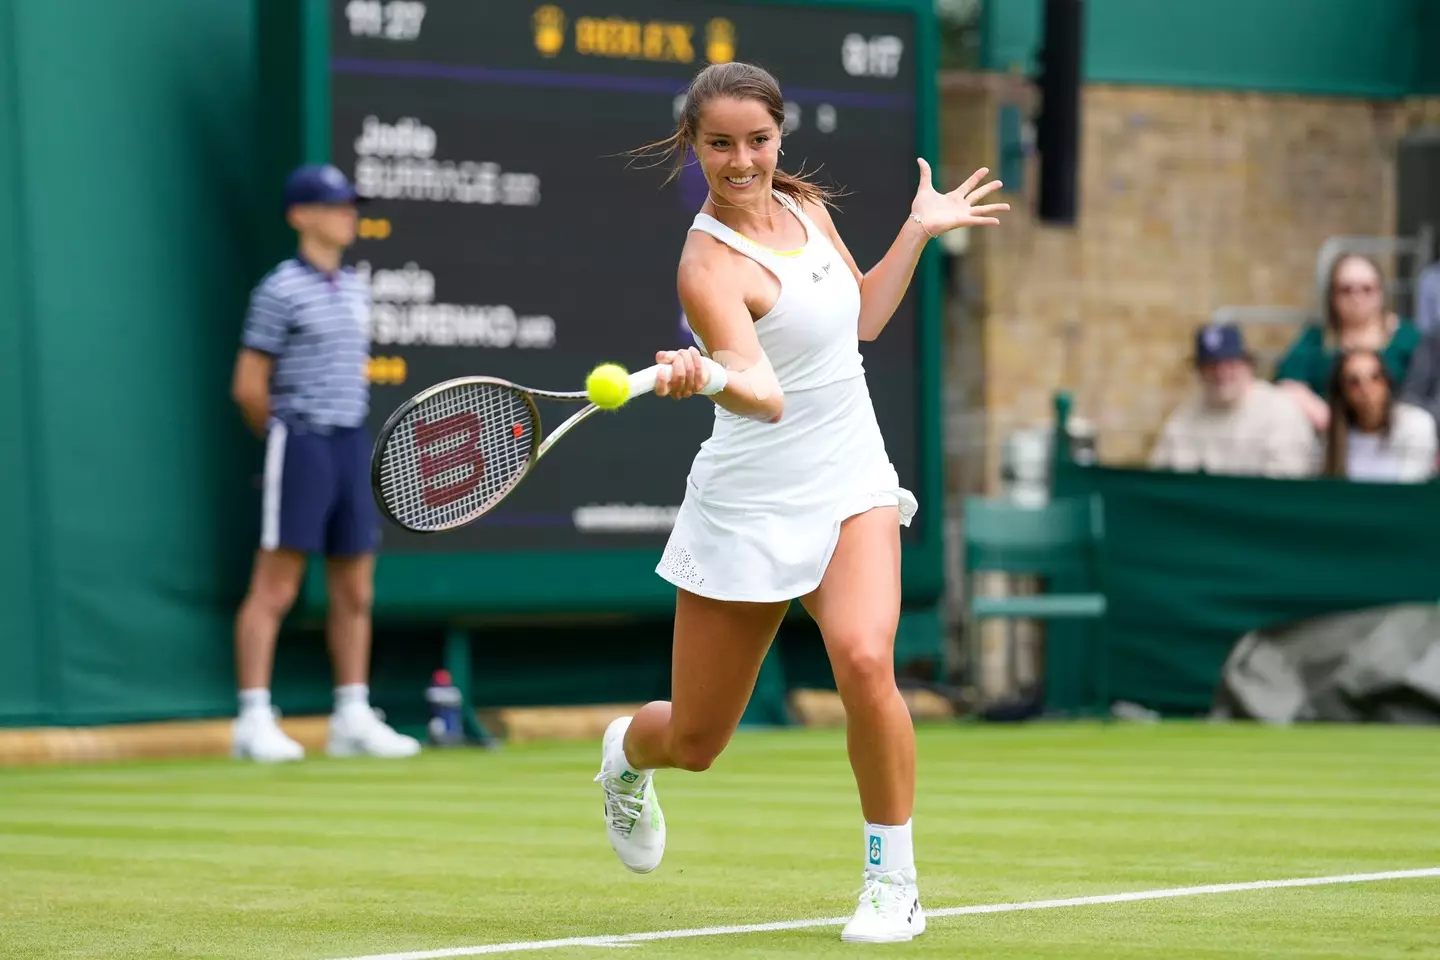 British tennis star Jodie Burrage has been praised for assisting a ball boy.